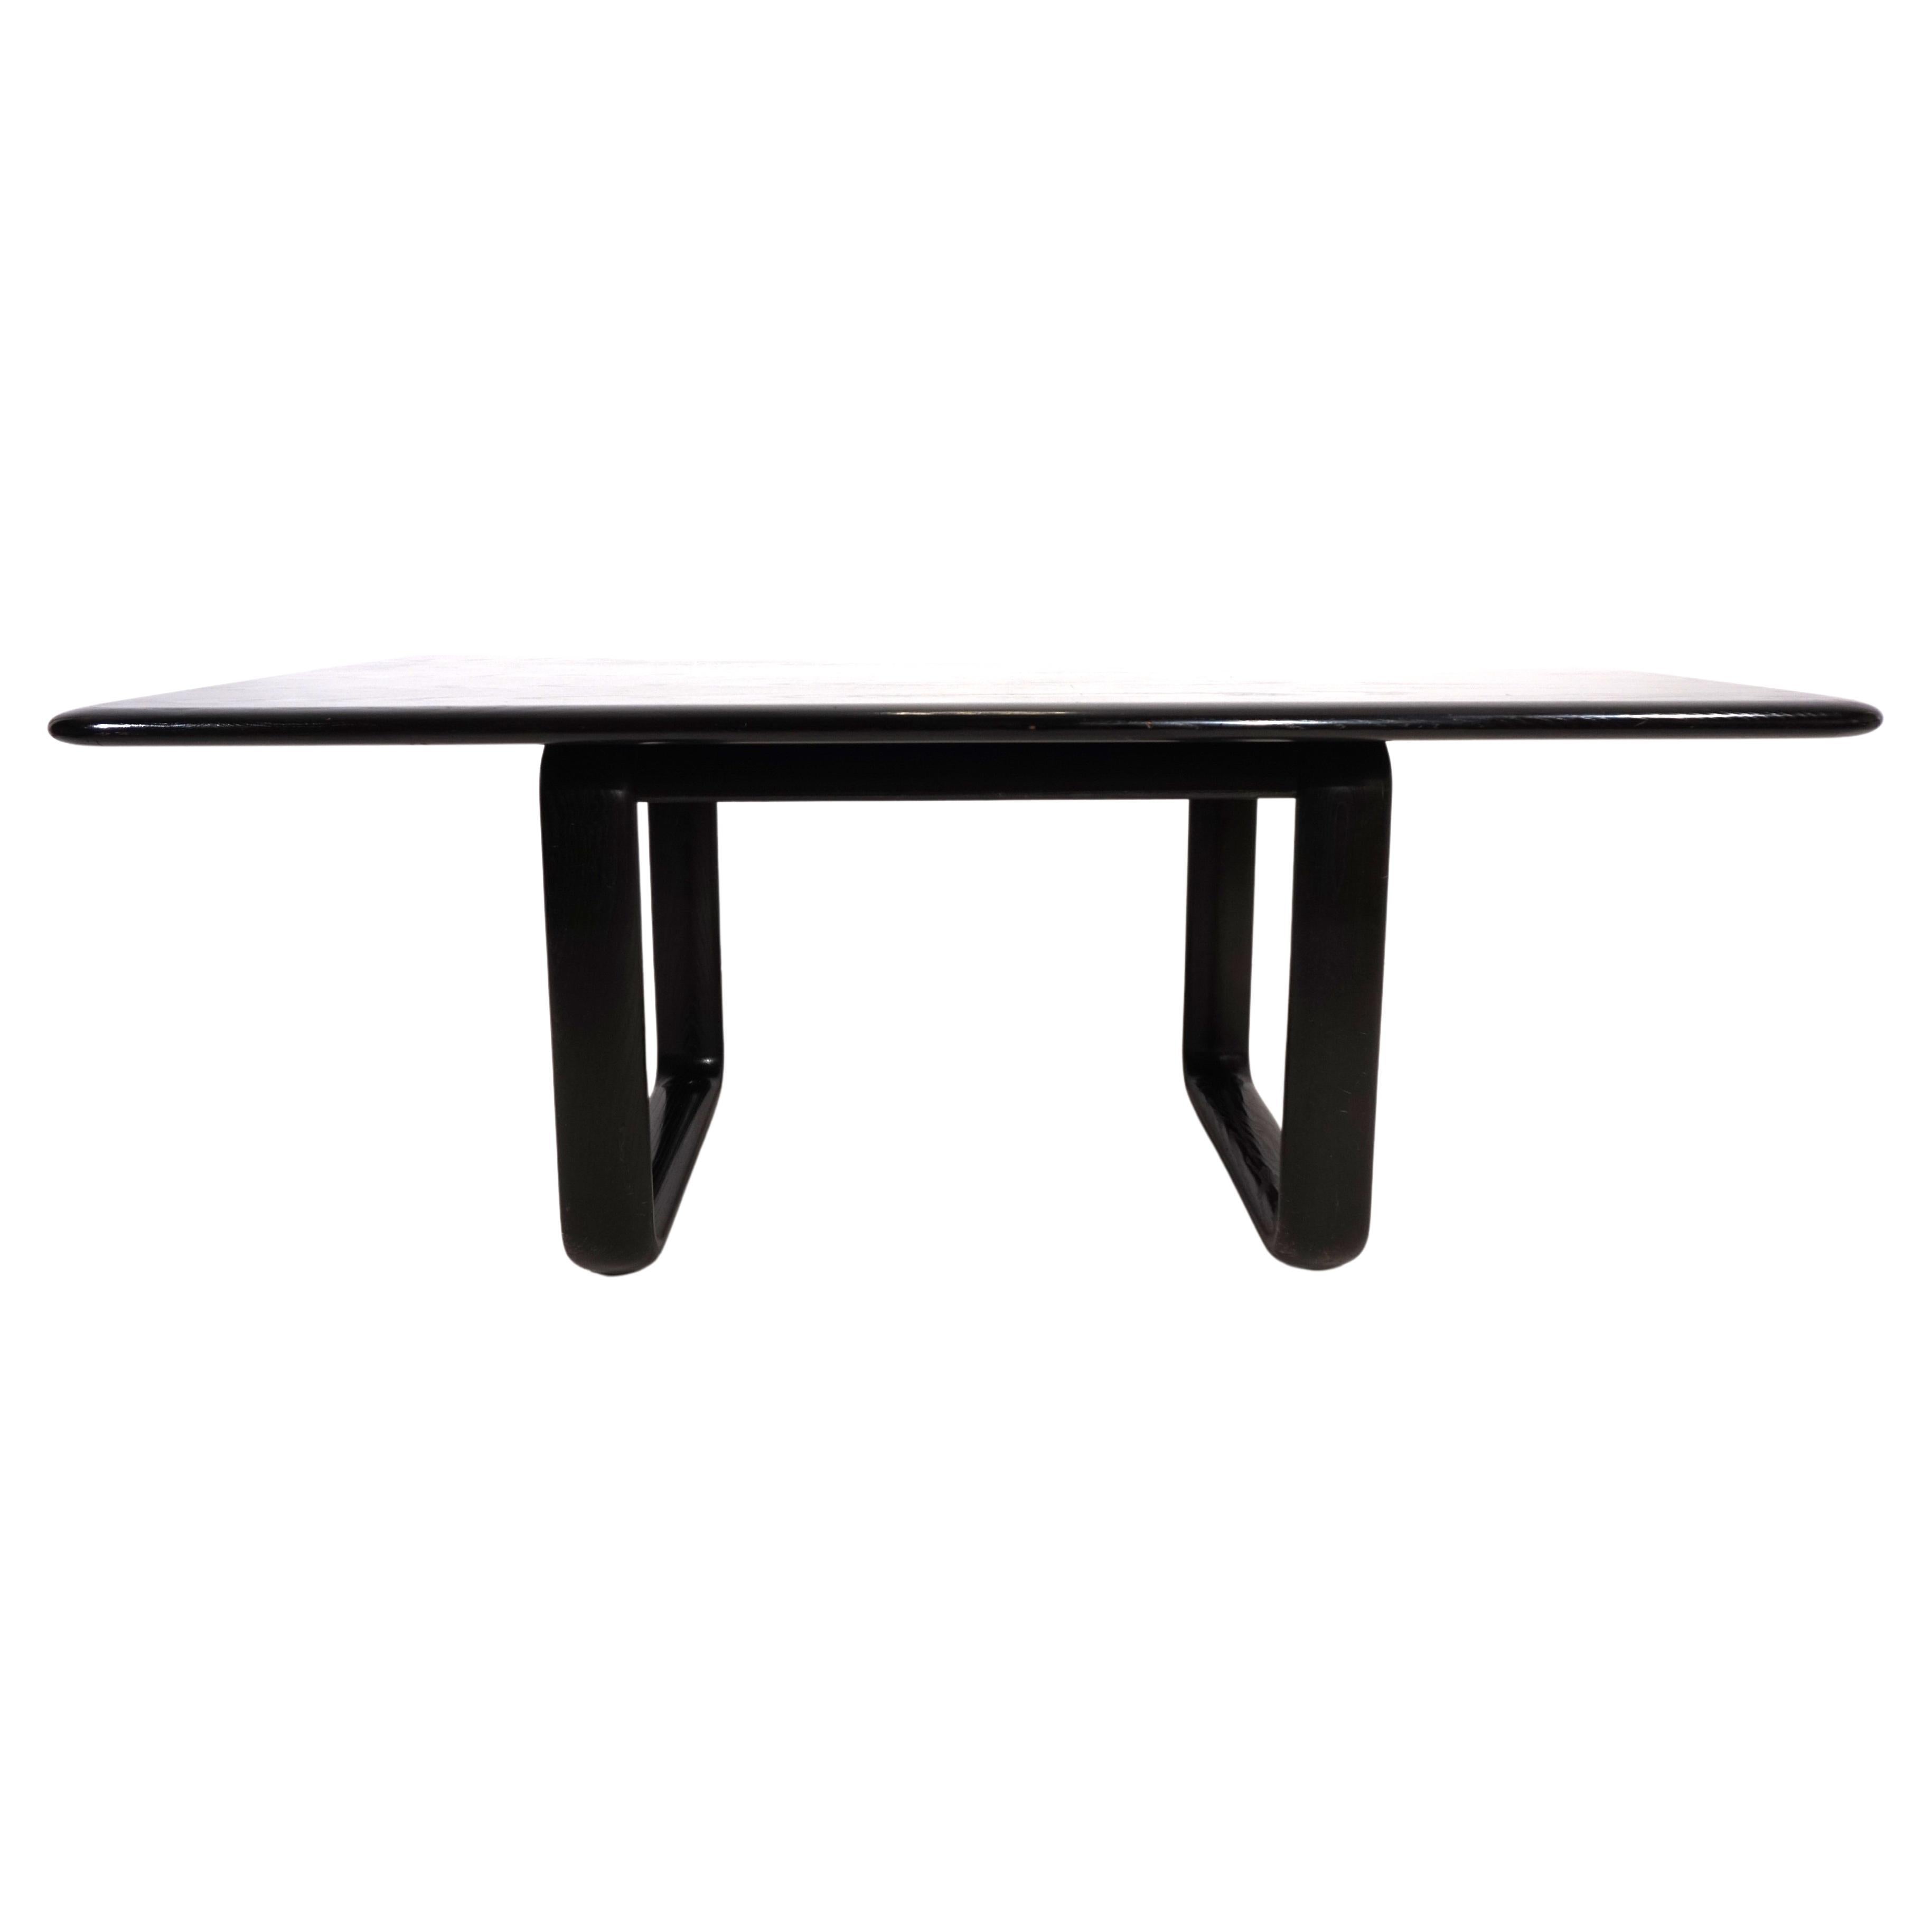 Rosenthal Hombre dining table by Burkhard Vogtherr For Sale